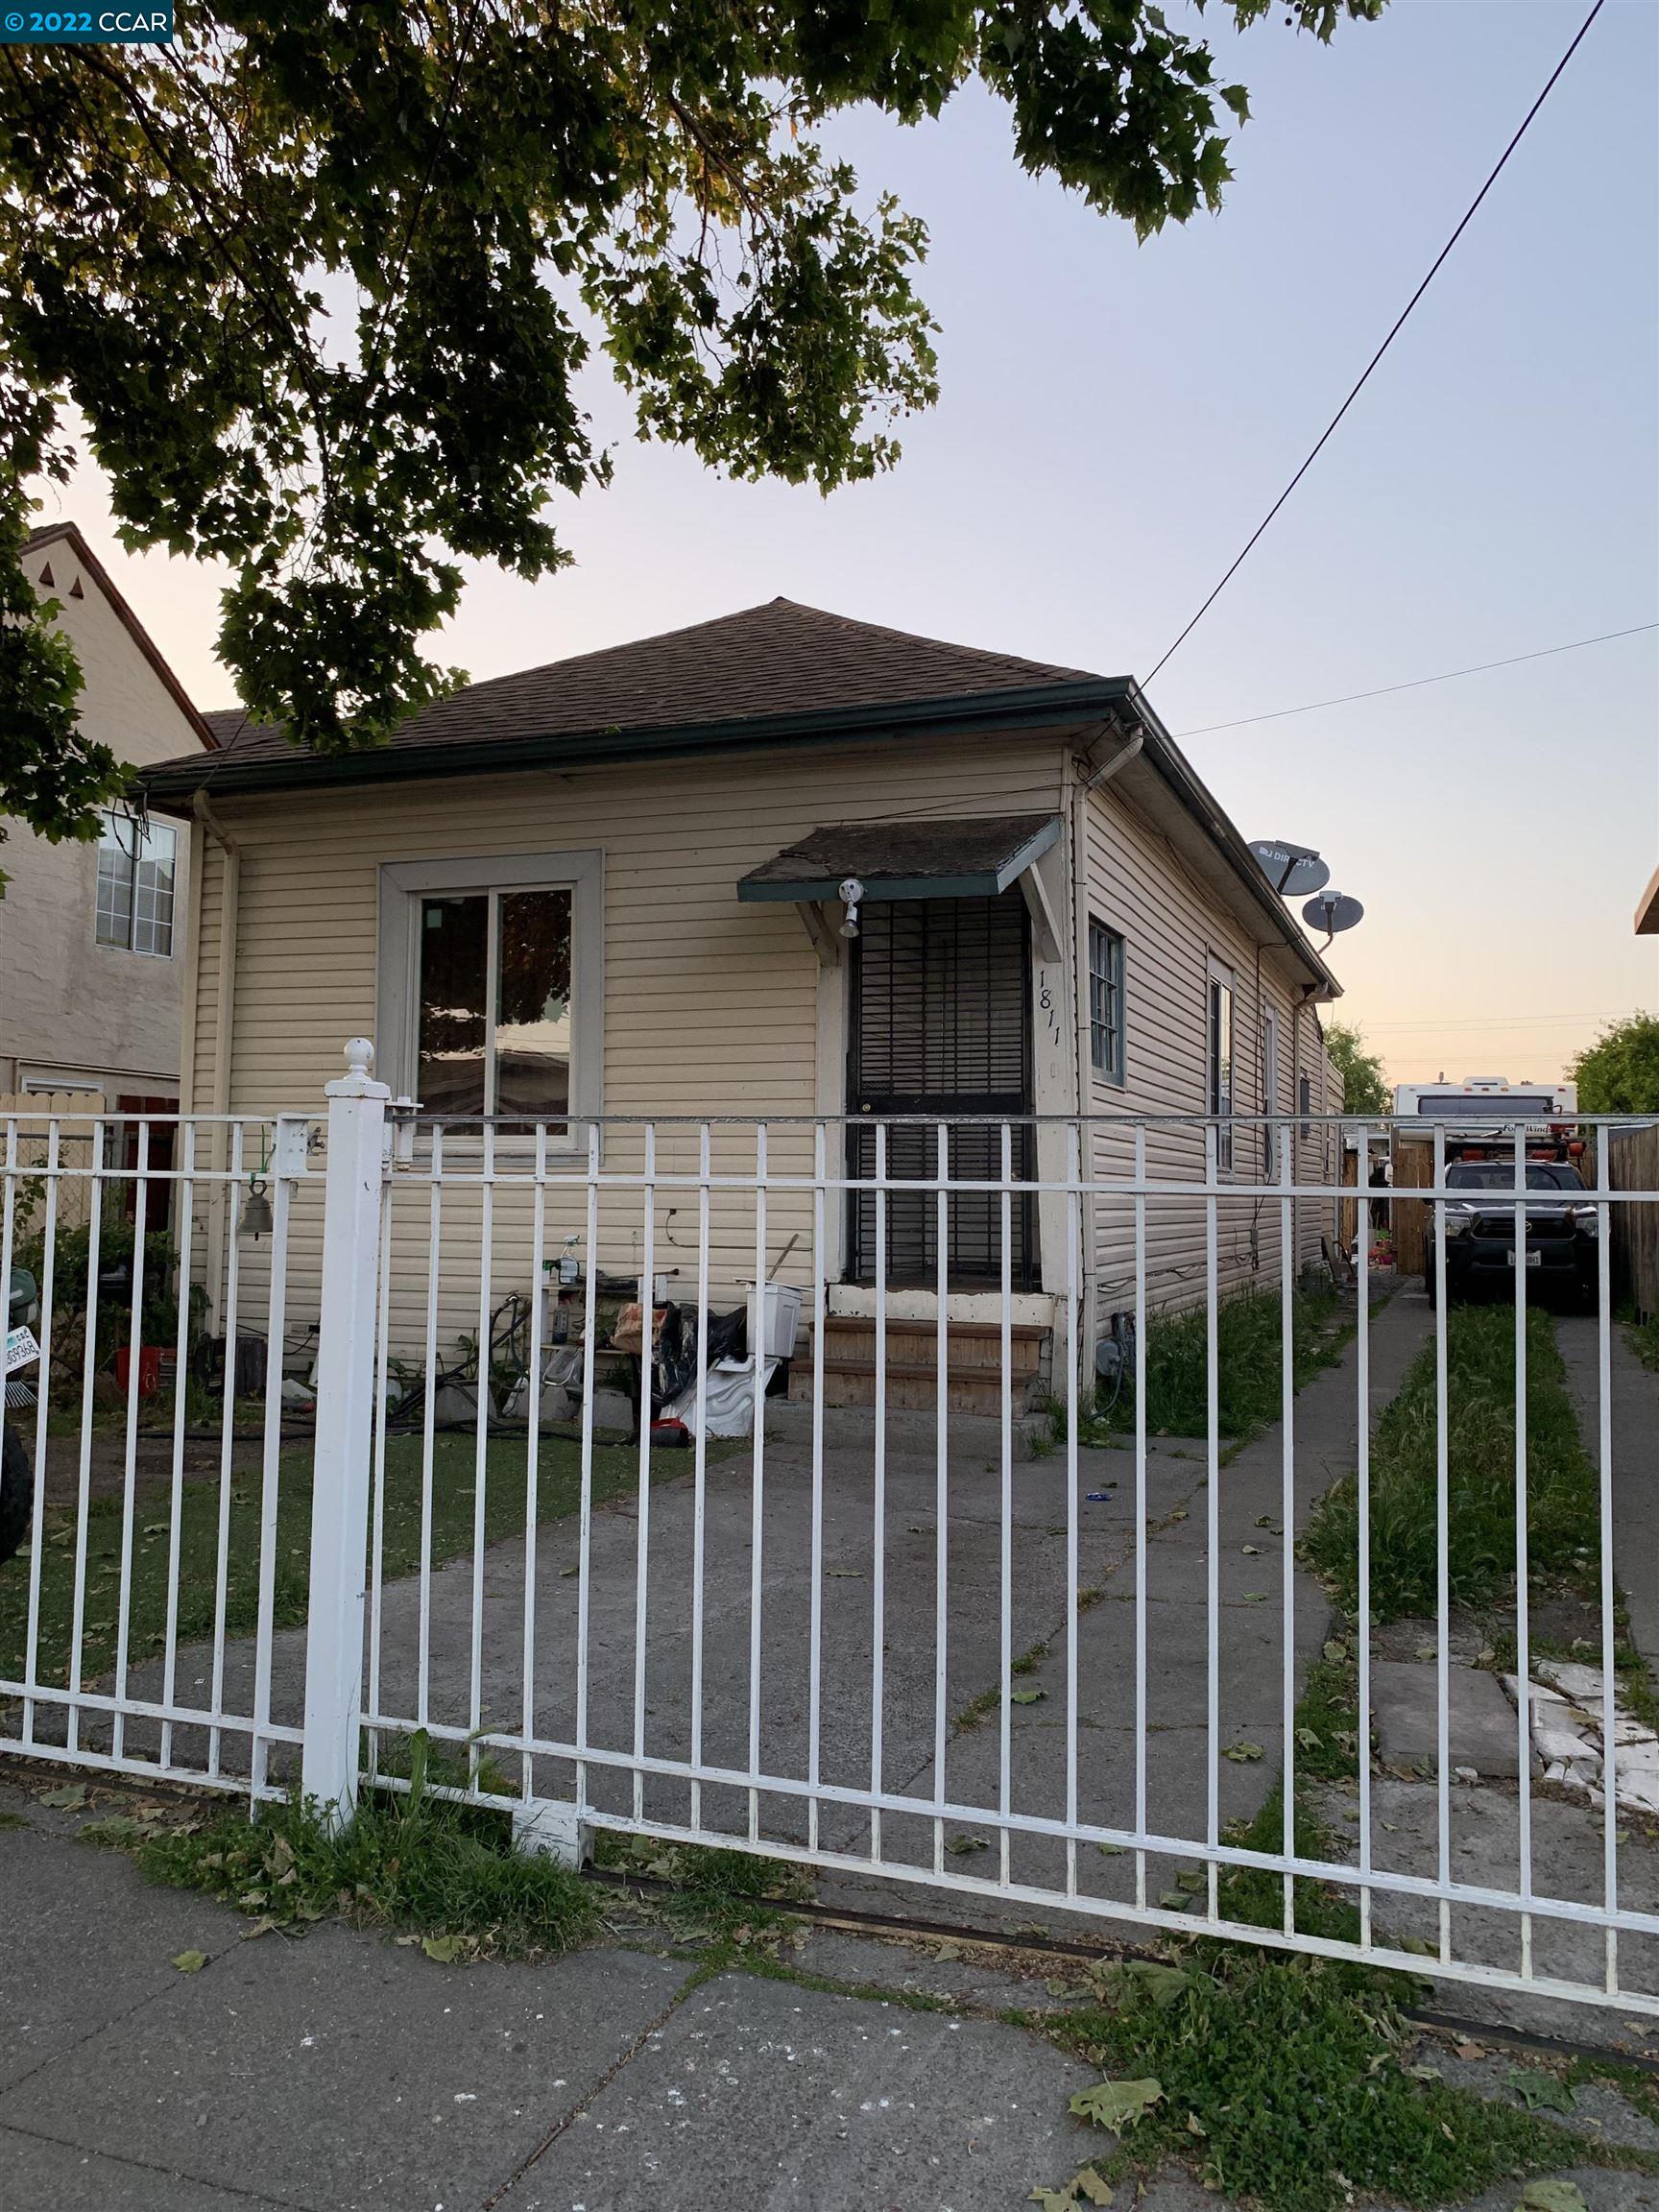 A classic starter home with great bones, wonderful fixer-upper oozing with potential great for the visionary investor, has high ceilings, long driveway for 2-3 cars. Close to public transportation BART, freeways, Kaiser Hospital, the marina, restaurants and much more.